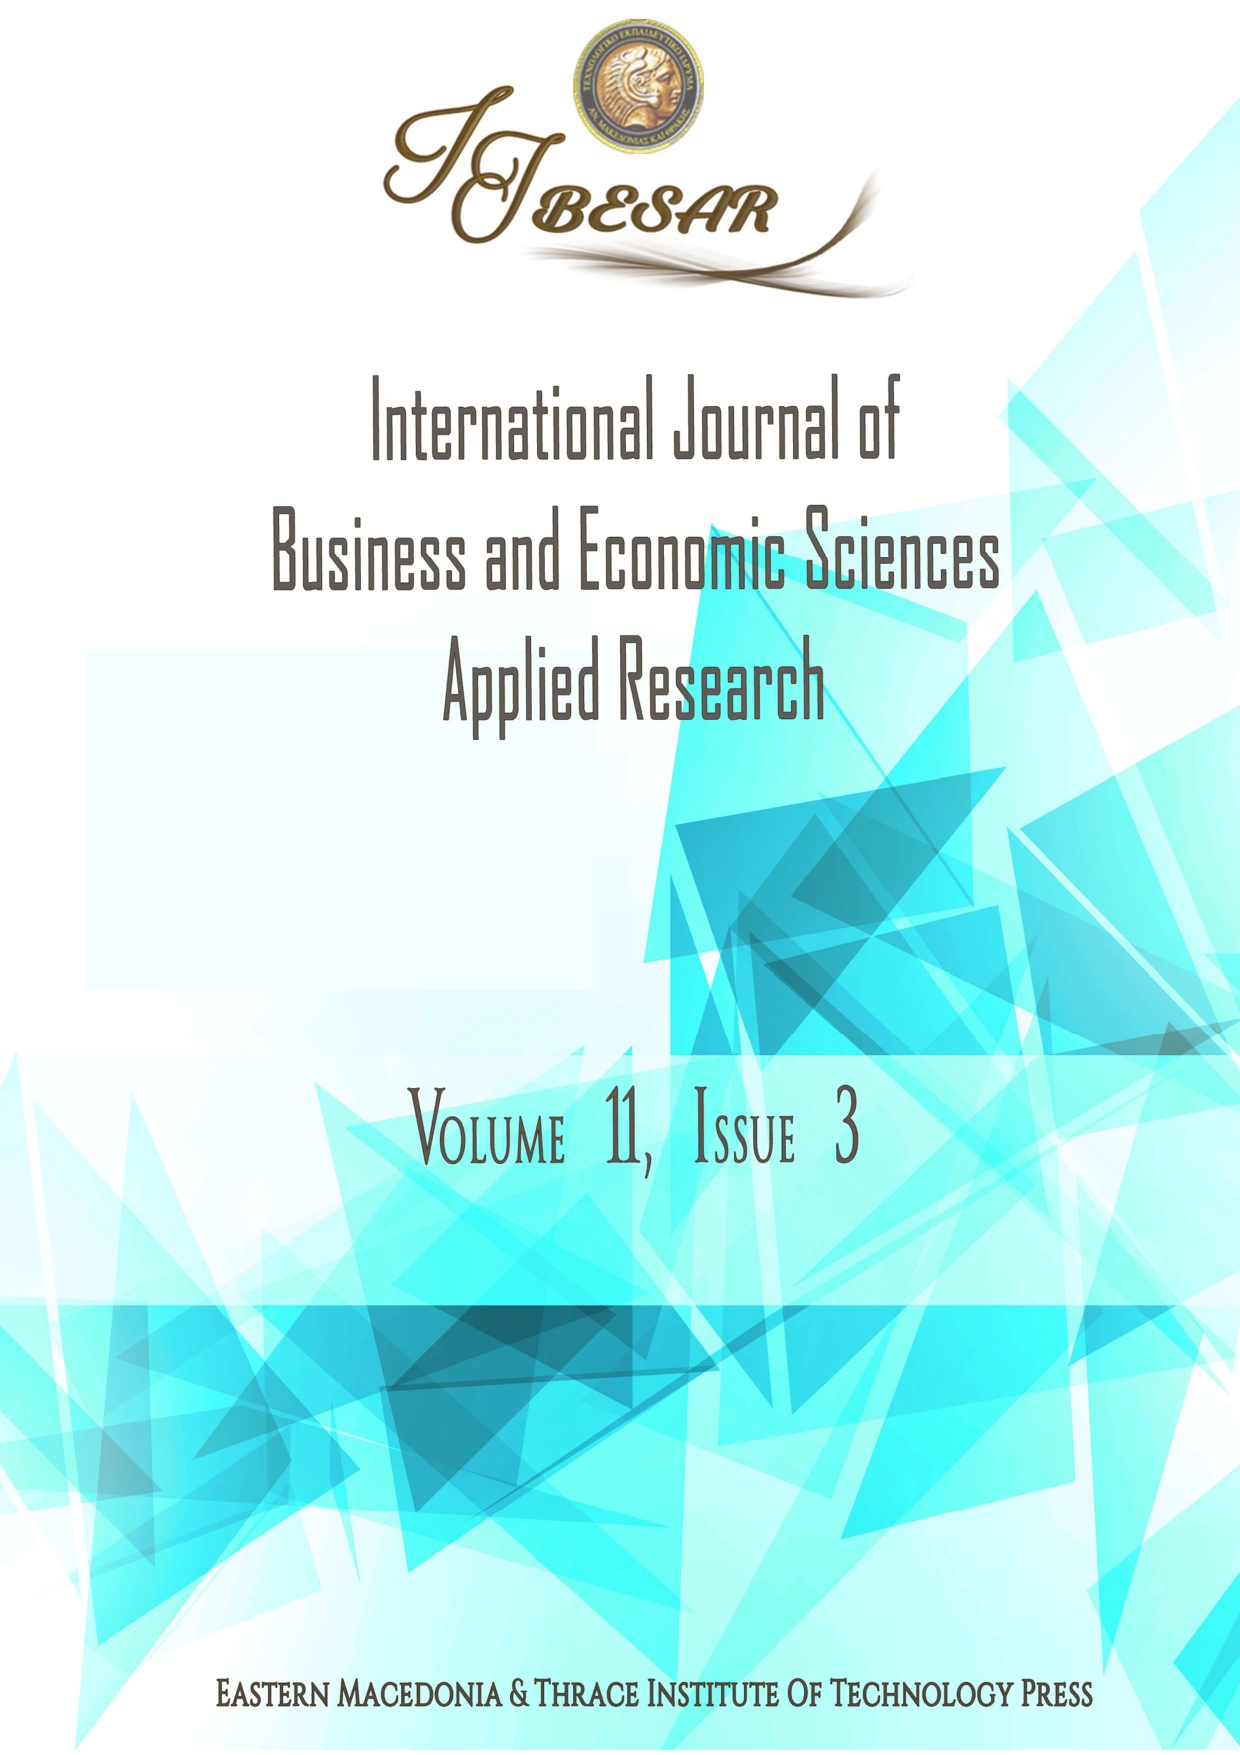 Trade Openness and Economic Growth in the GCC Countries: A Panel Data Analysis Approach